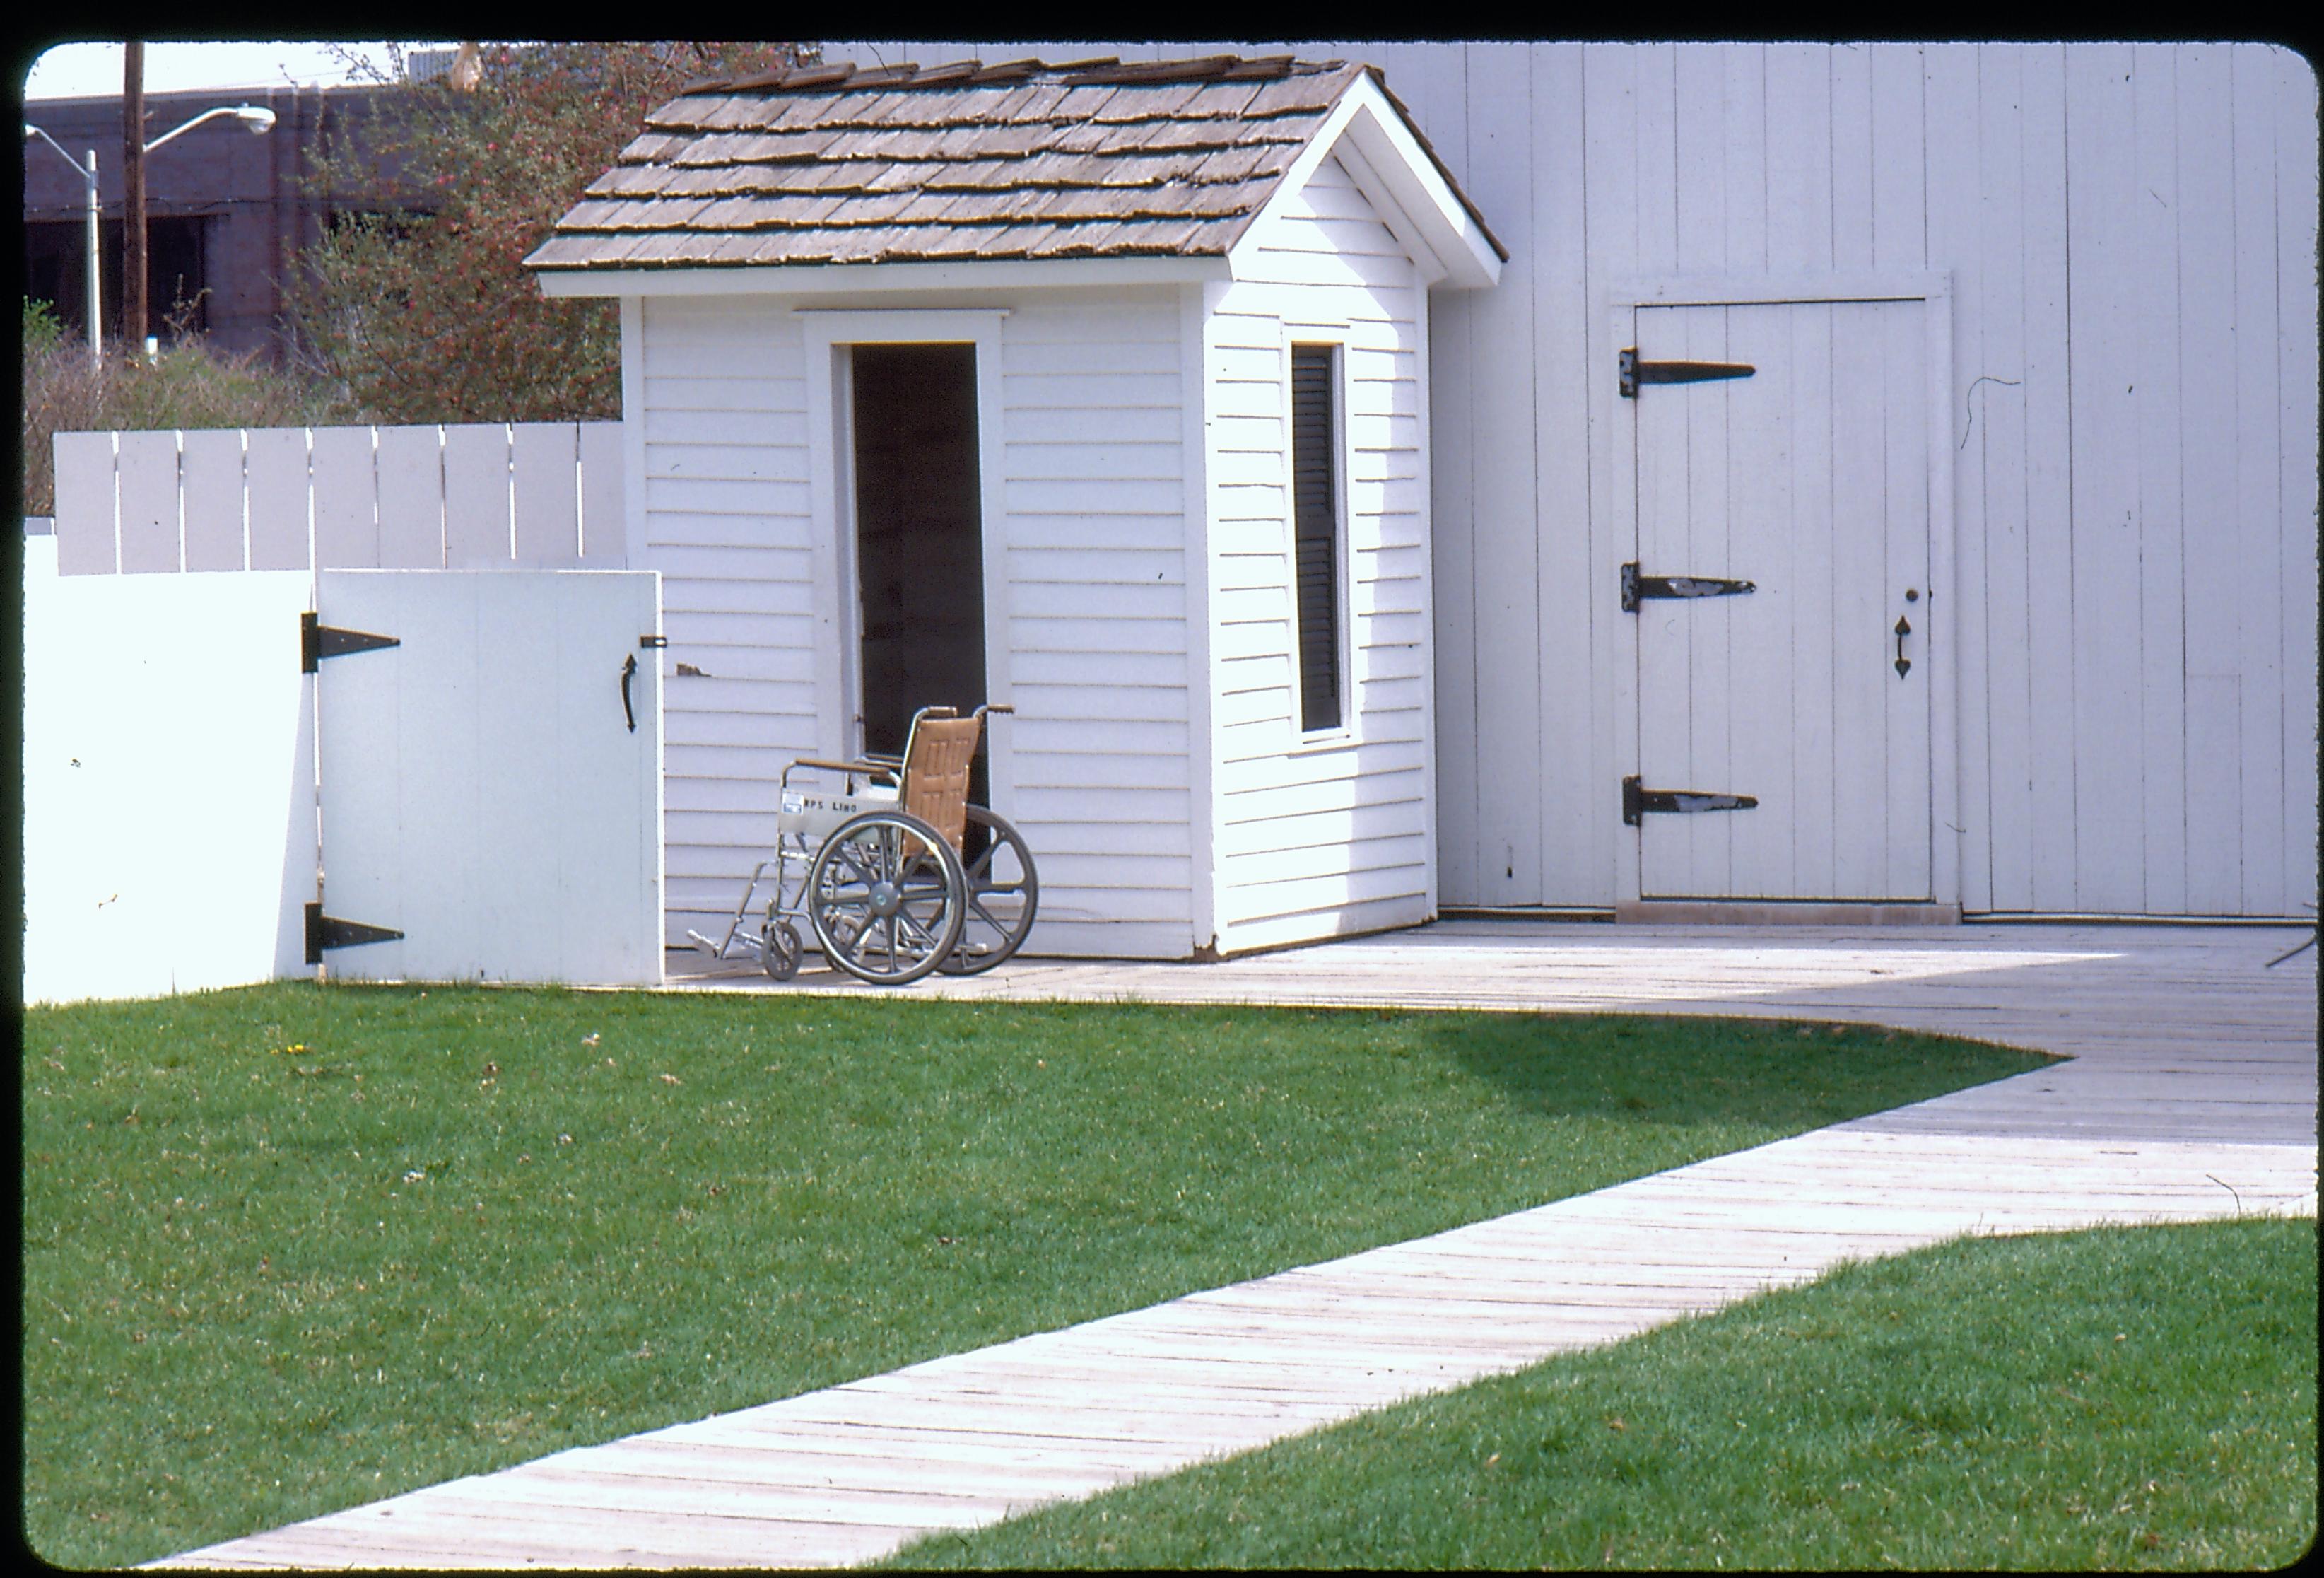 Back yard of the Lincoln Home, facing north east. A wheelchair sits near the privy and north east access gate to the yard.